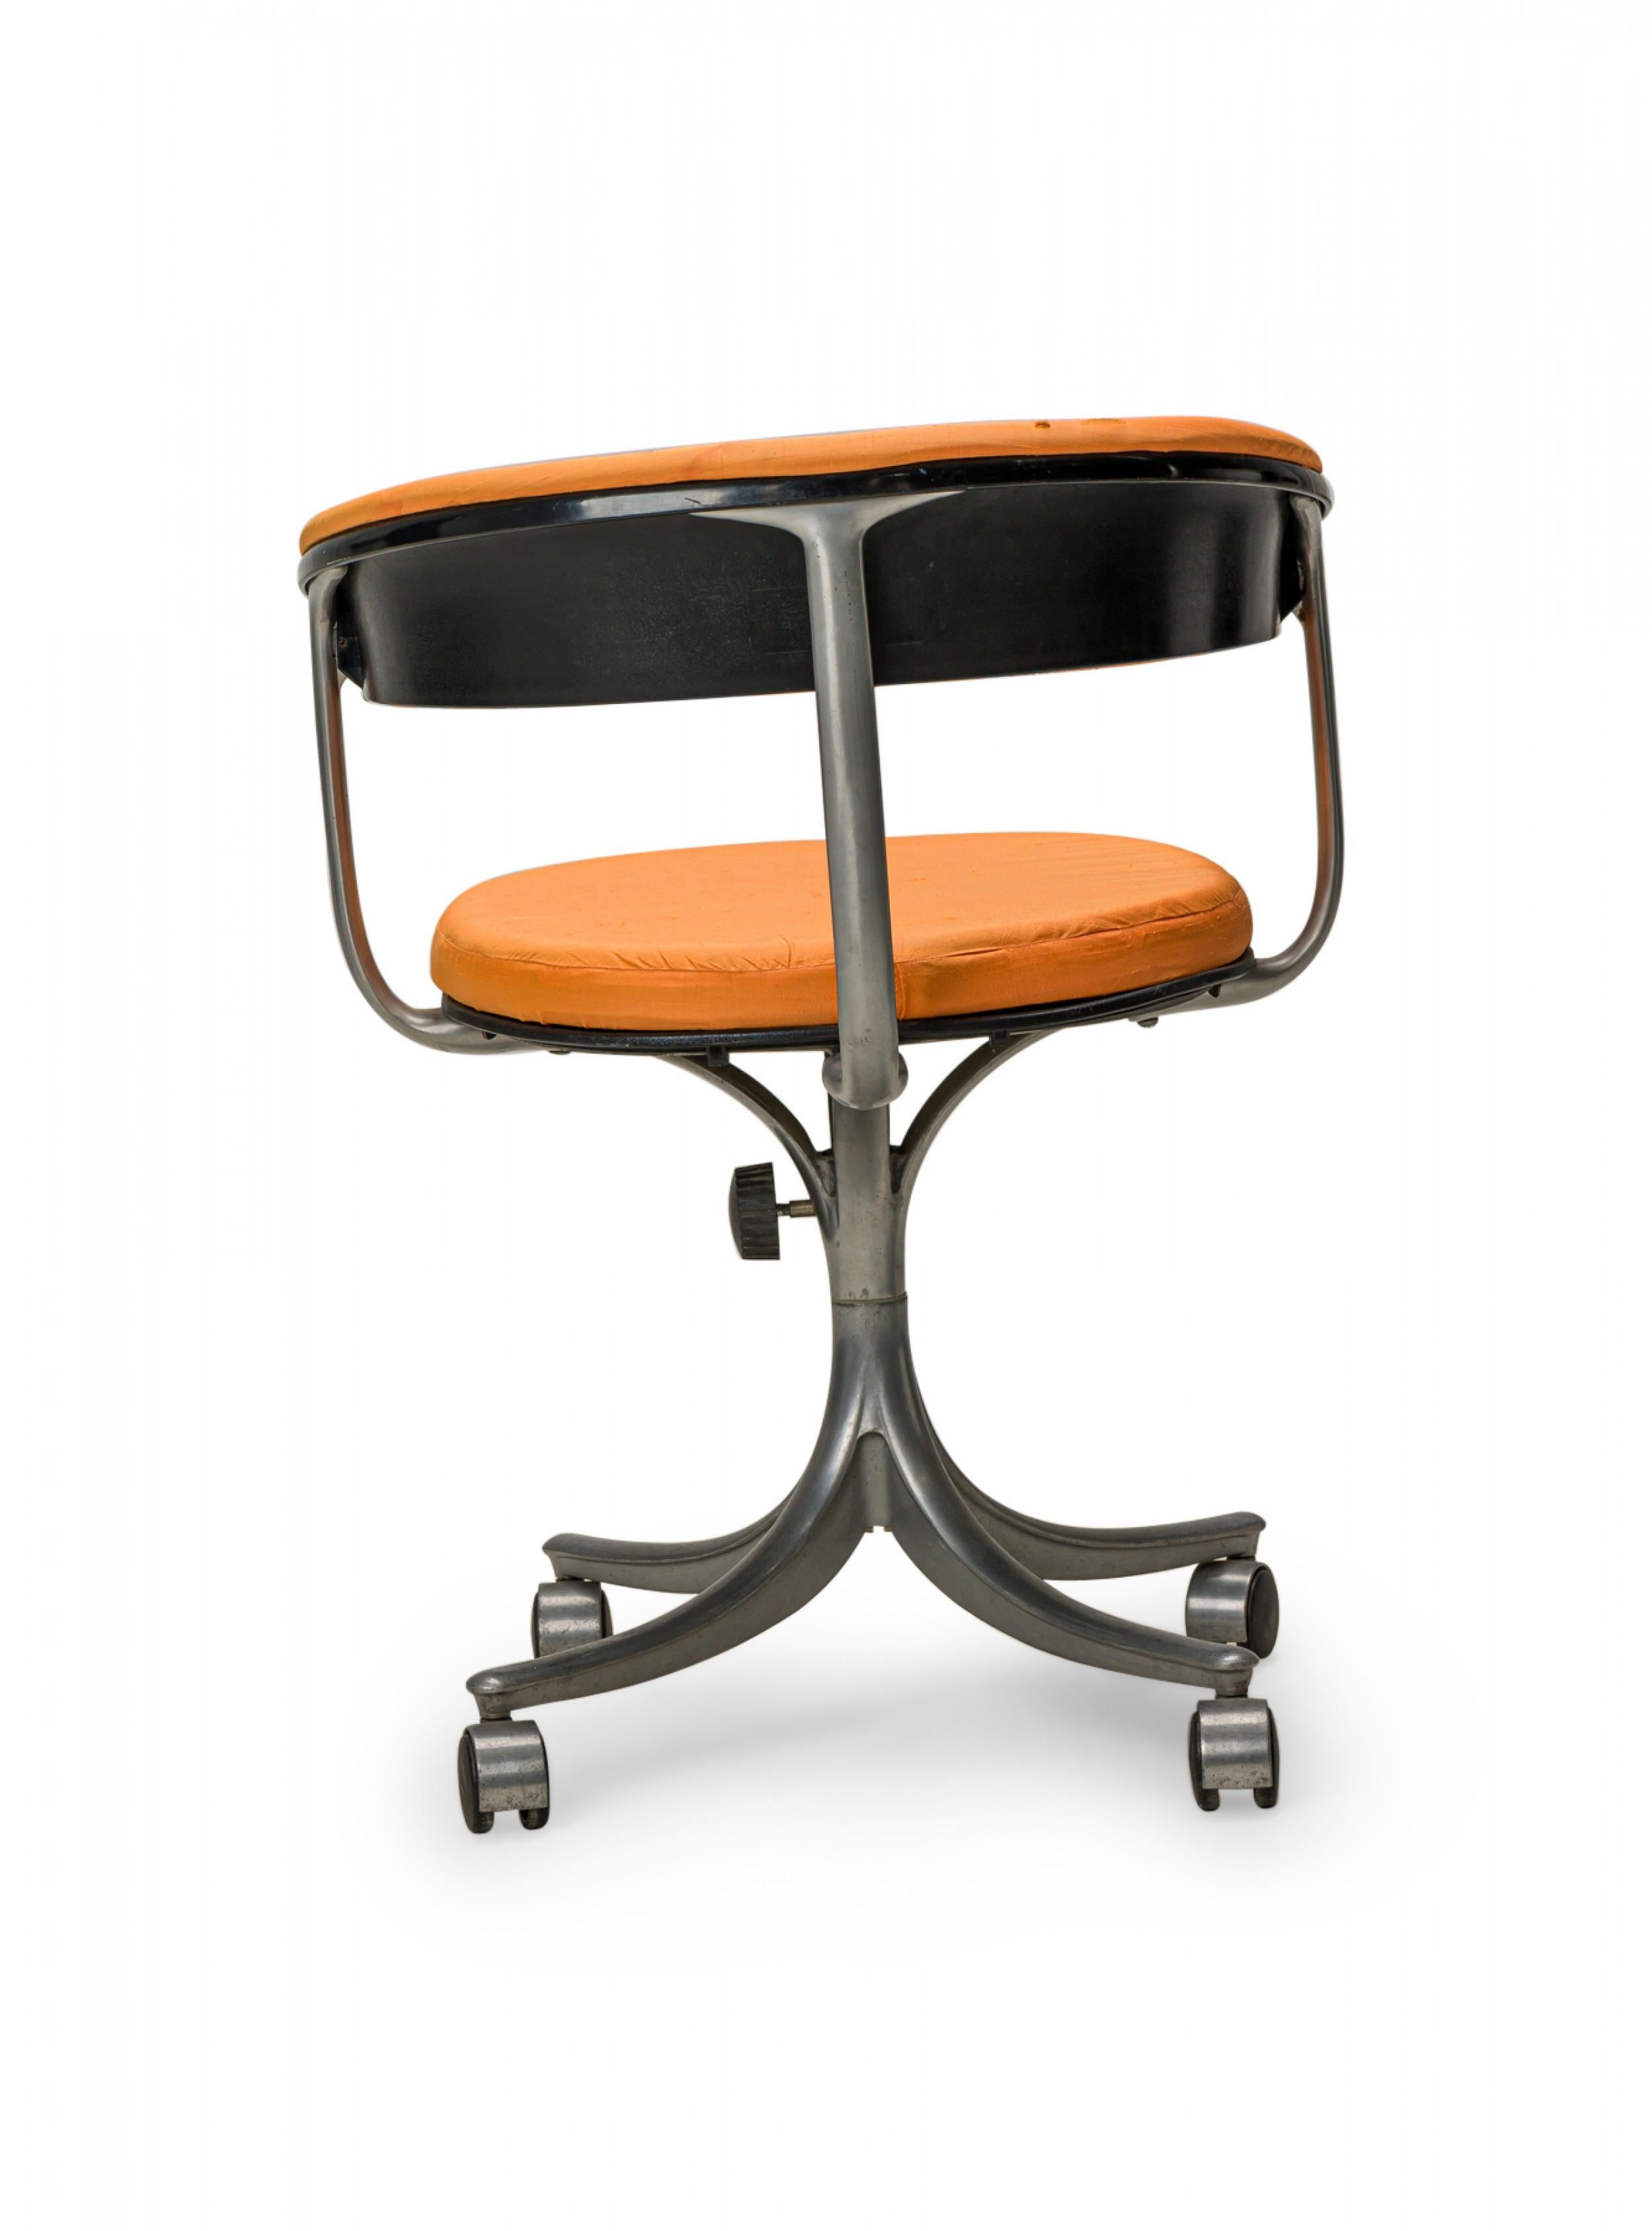 20th Century Jørgen Rasmussen Danish Orange Upholstery and Silver Metal Rolling Office Chair For Sale